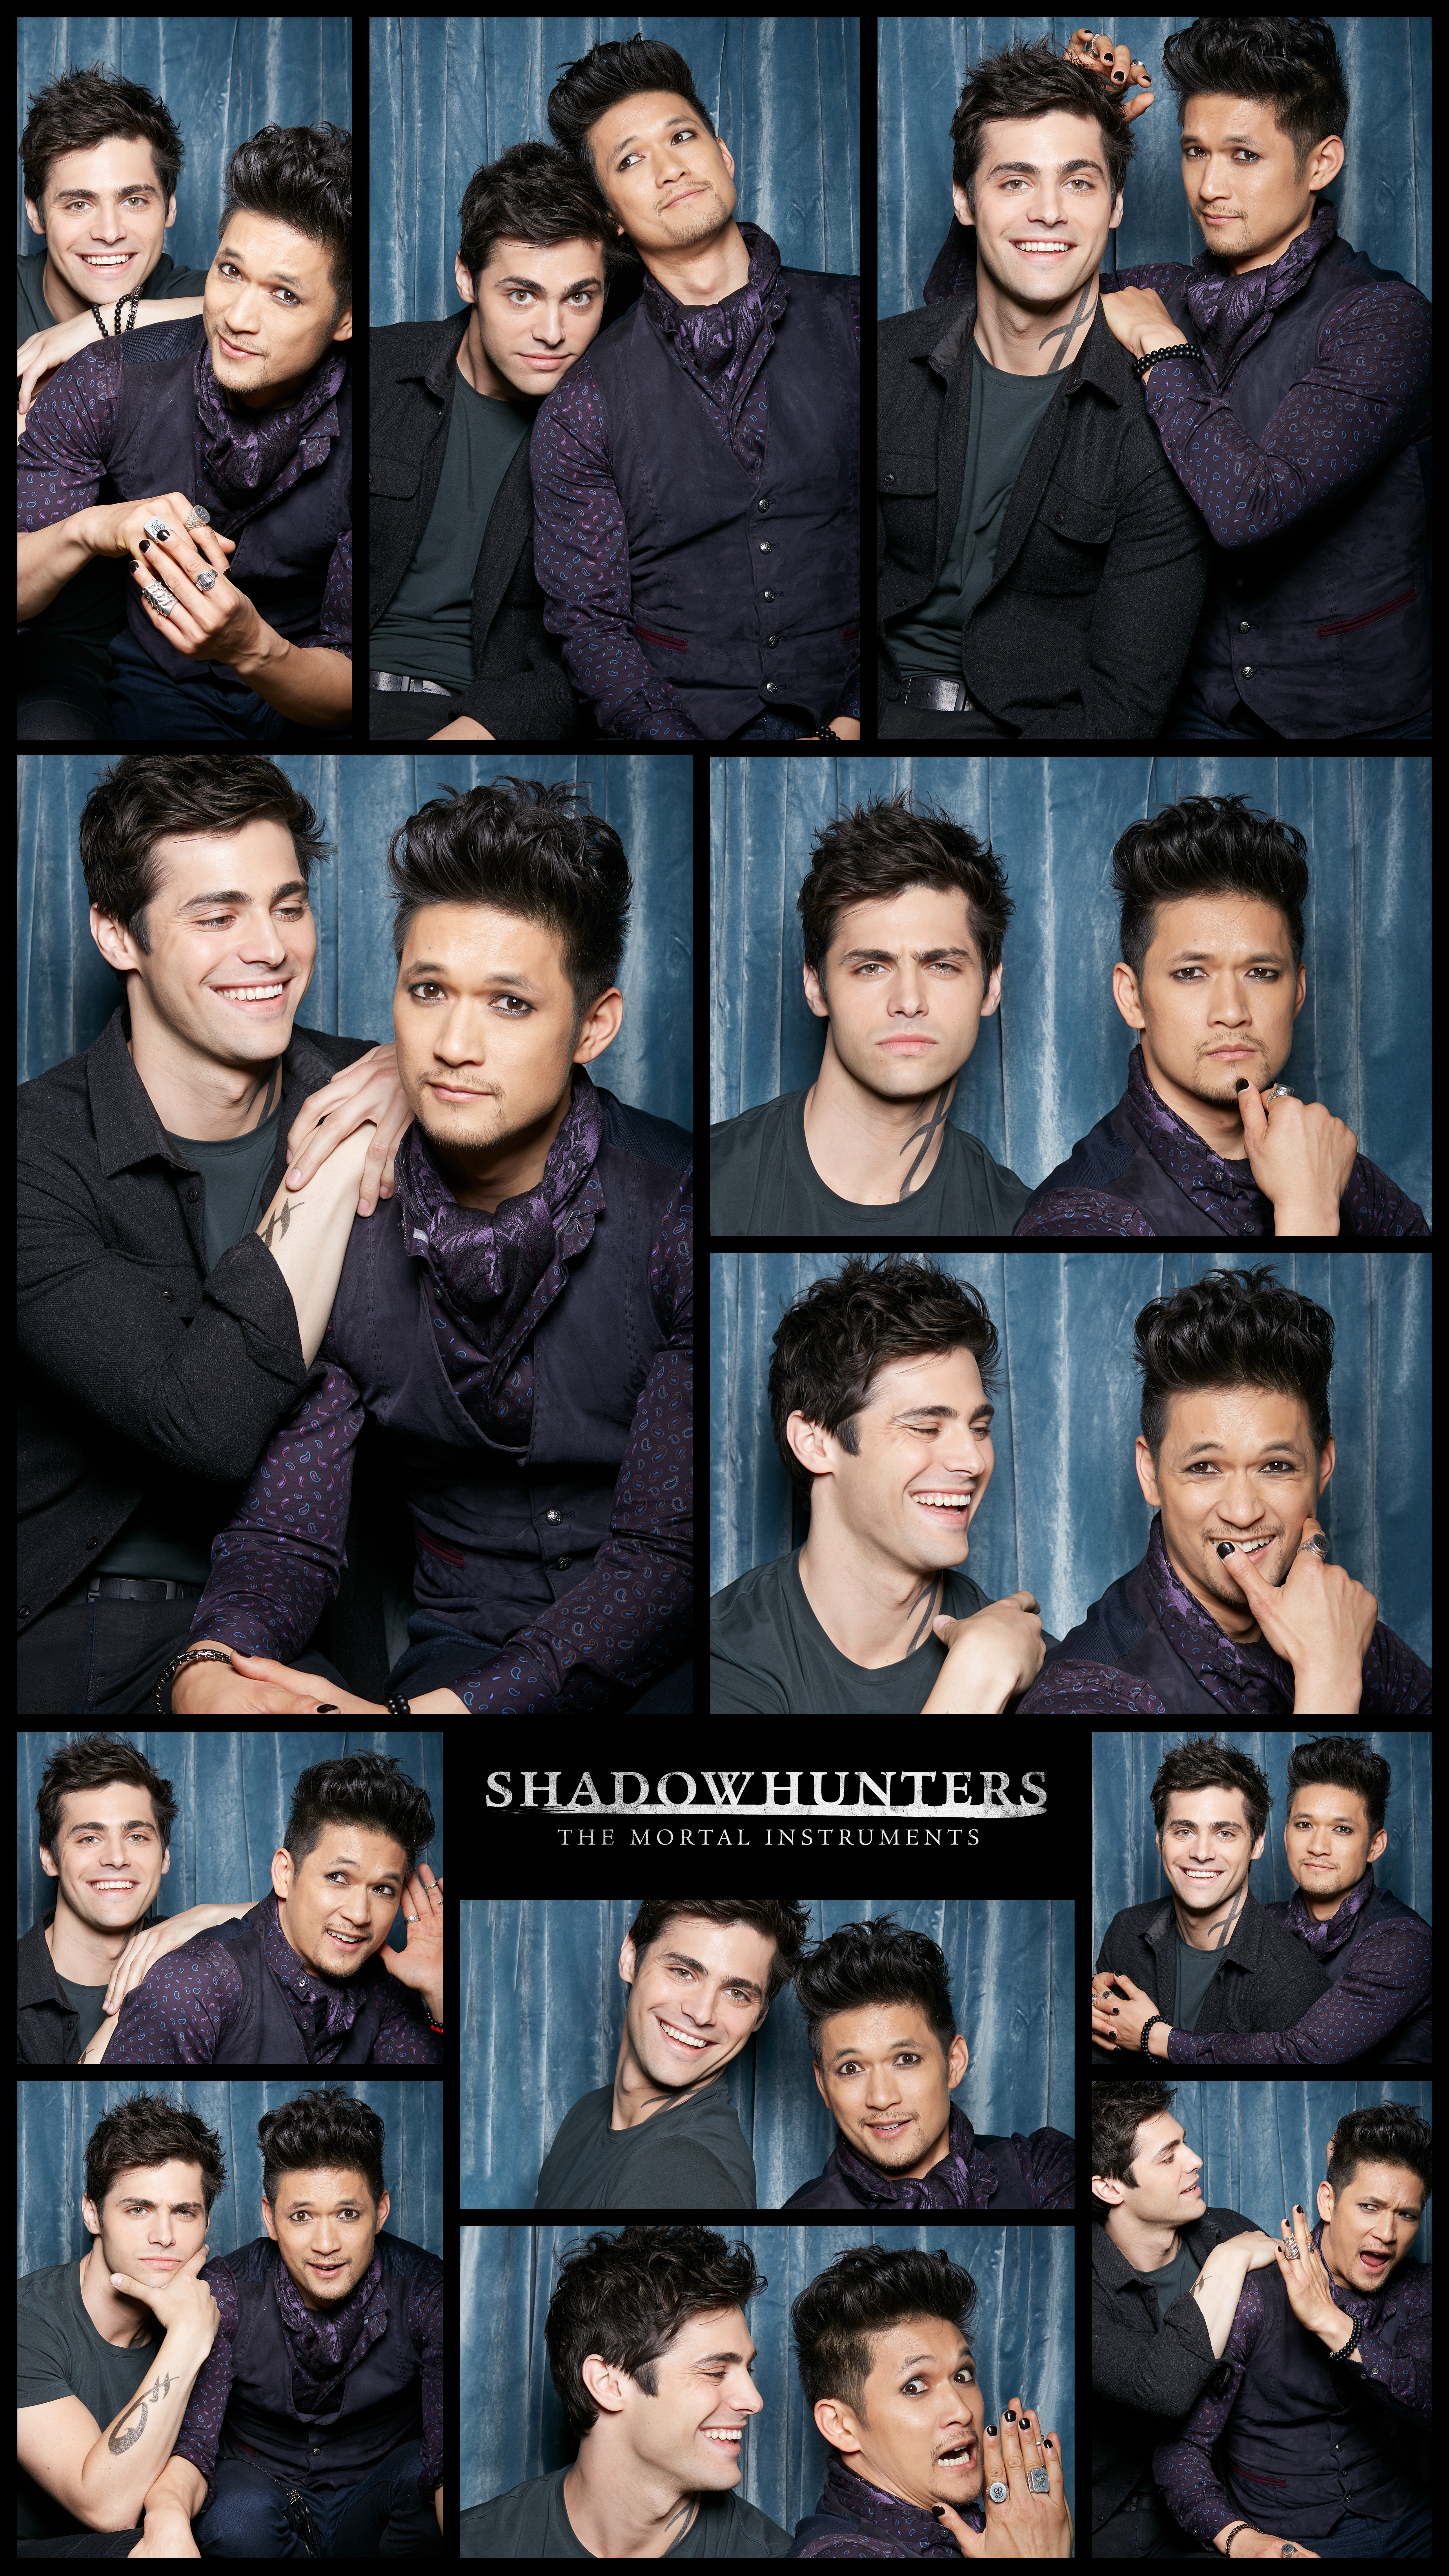 Exclusive Malec Photobooth Photos Unlocked Shadowhunters Form